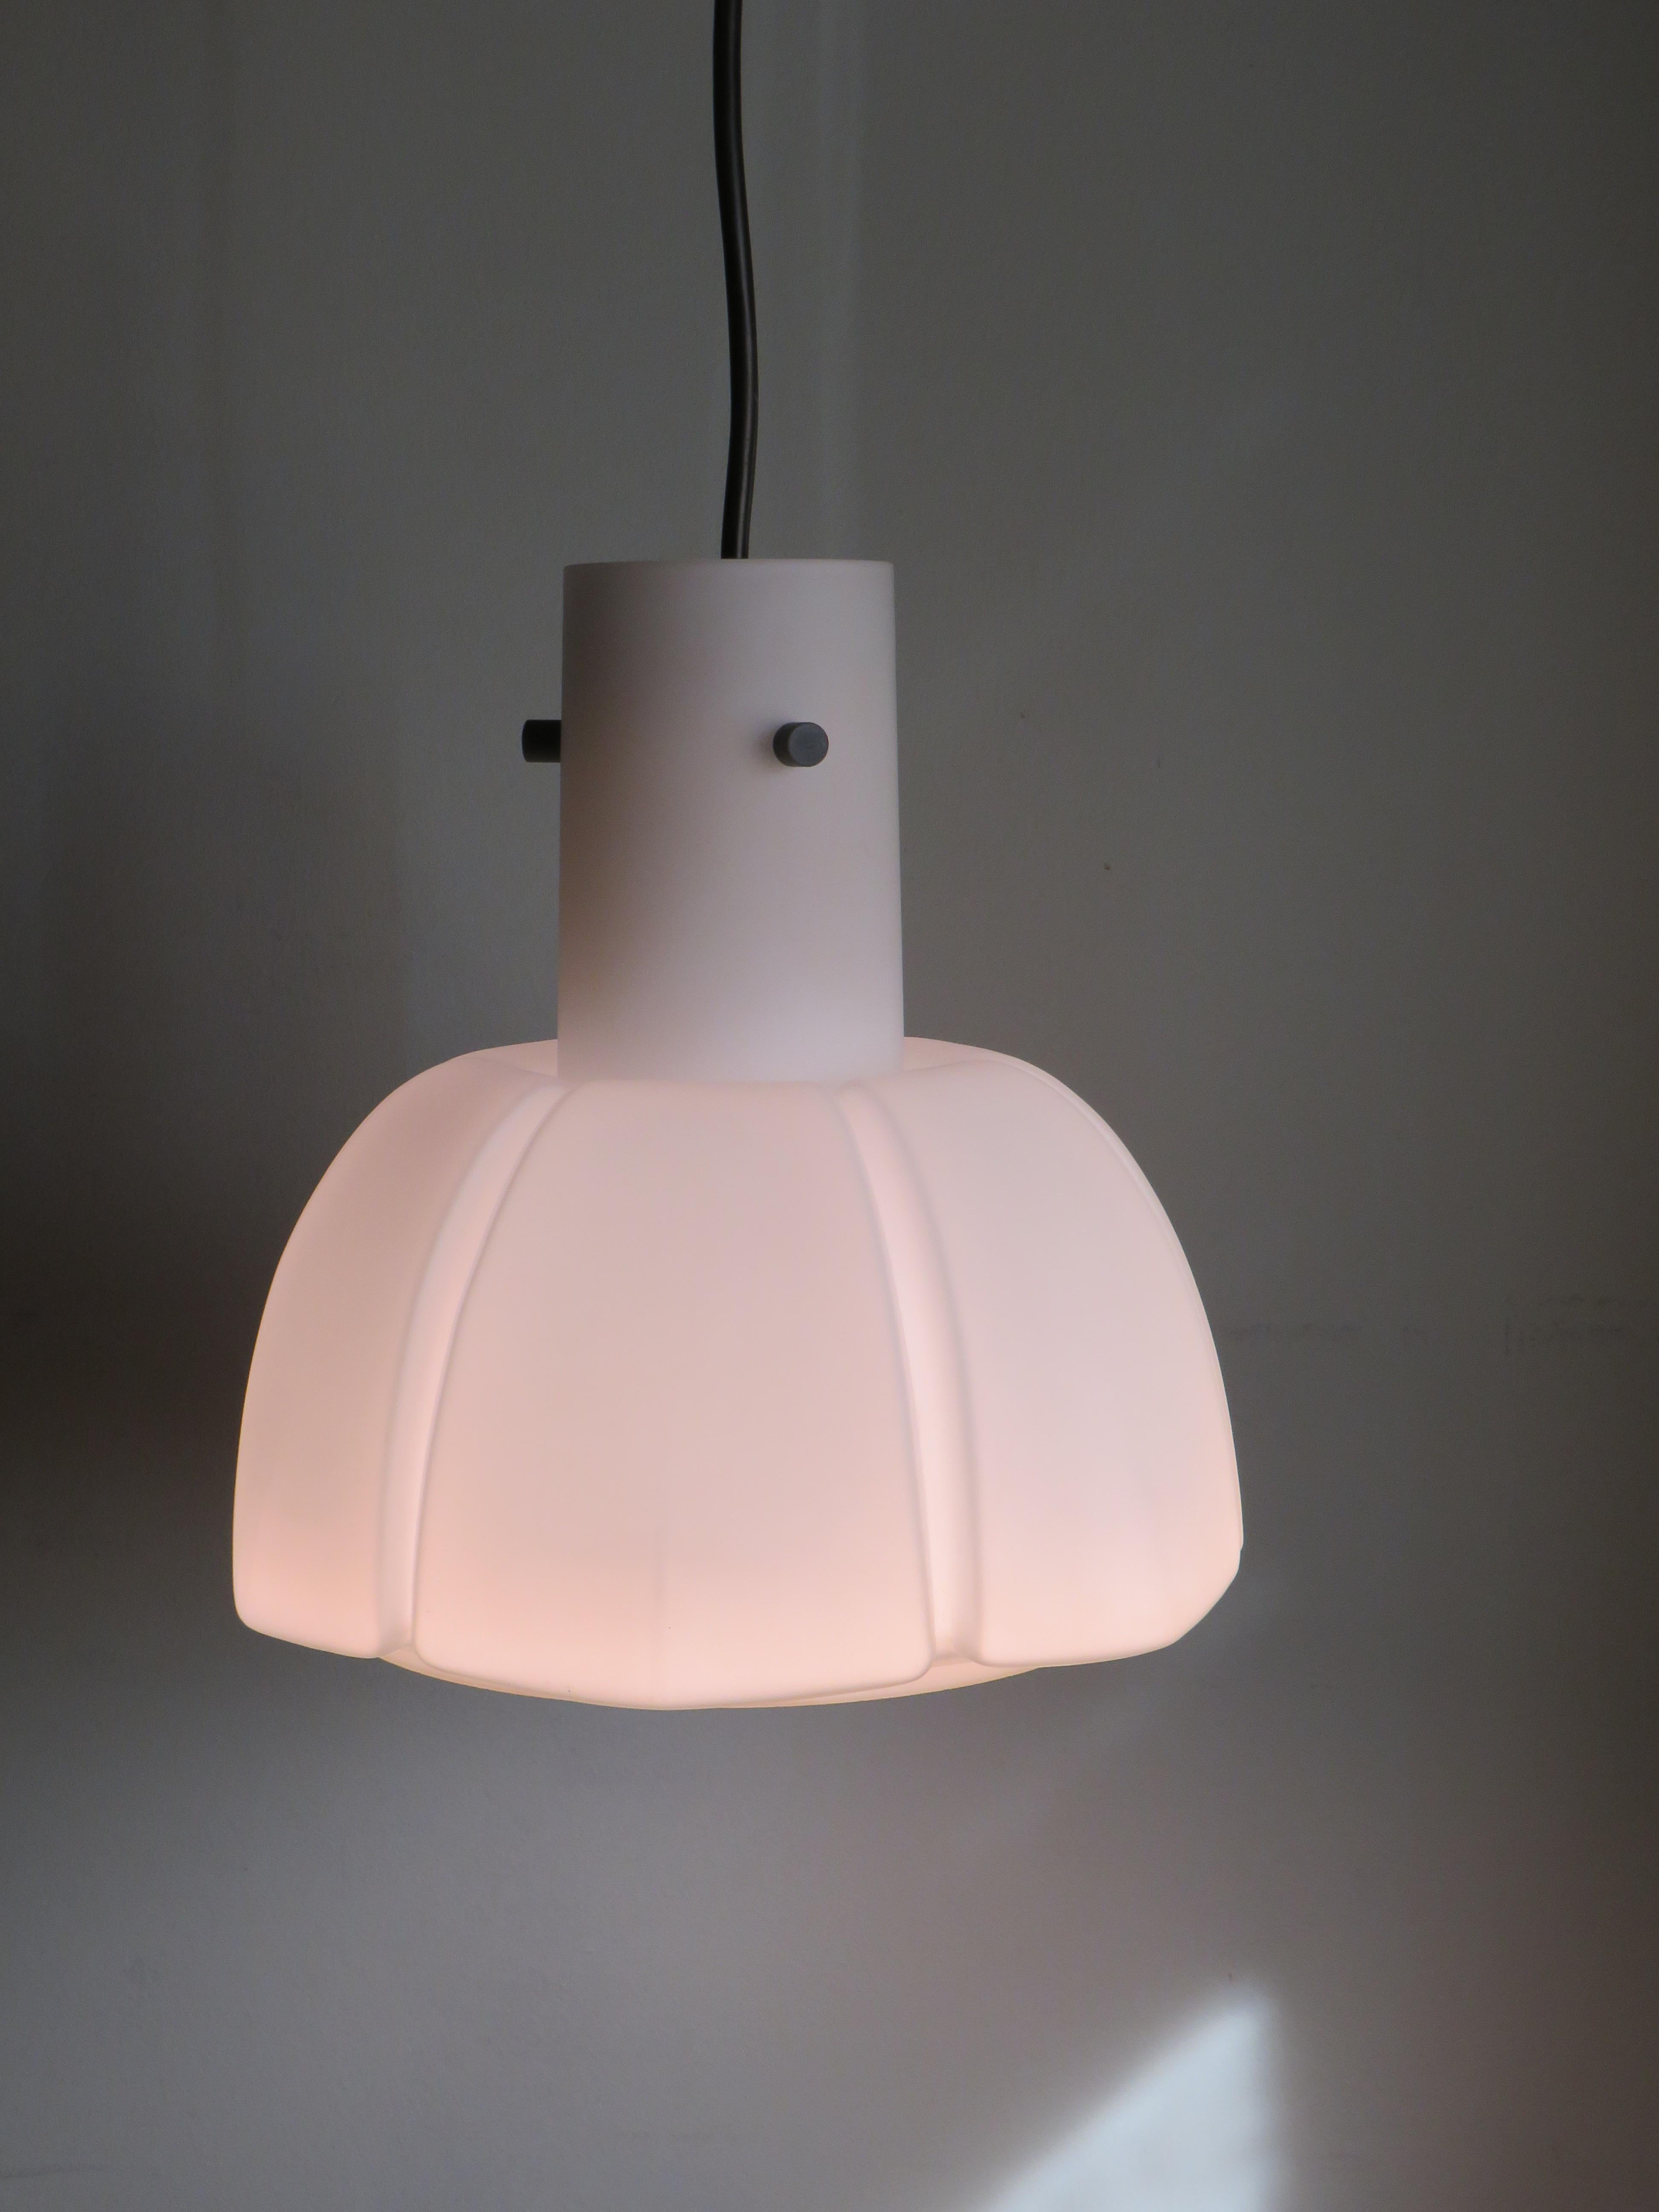 The lamp has a calyx shape made of thick white Opaline glass and a metal socket with an E 27 fitting, which is fixed in the lamp by means of 3 metal elements.
The lamp is in perfect condition and the factory label is present.
The height of the